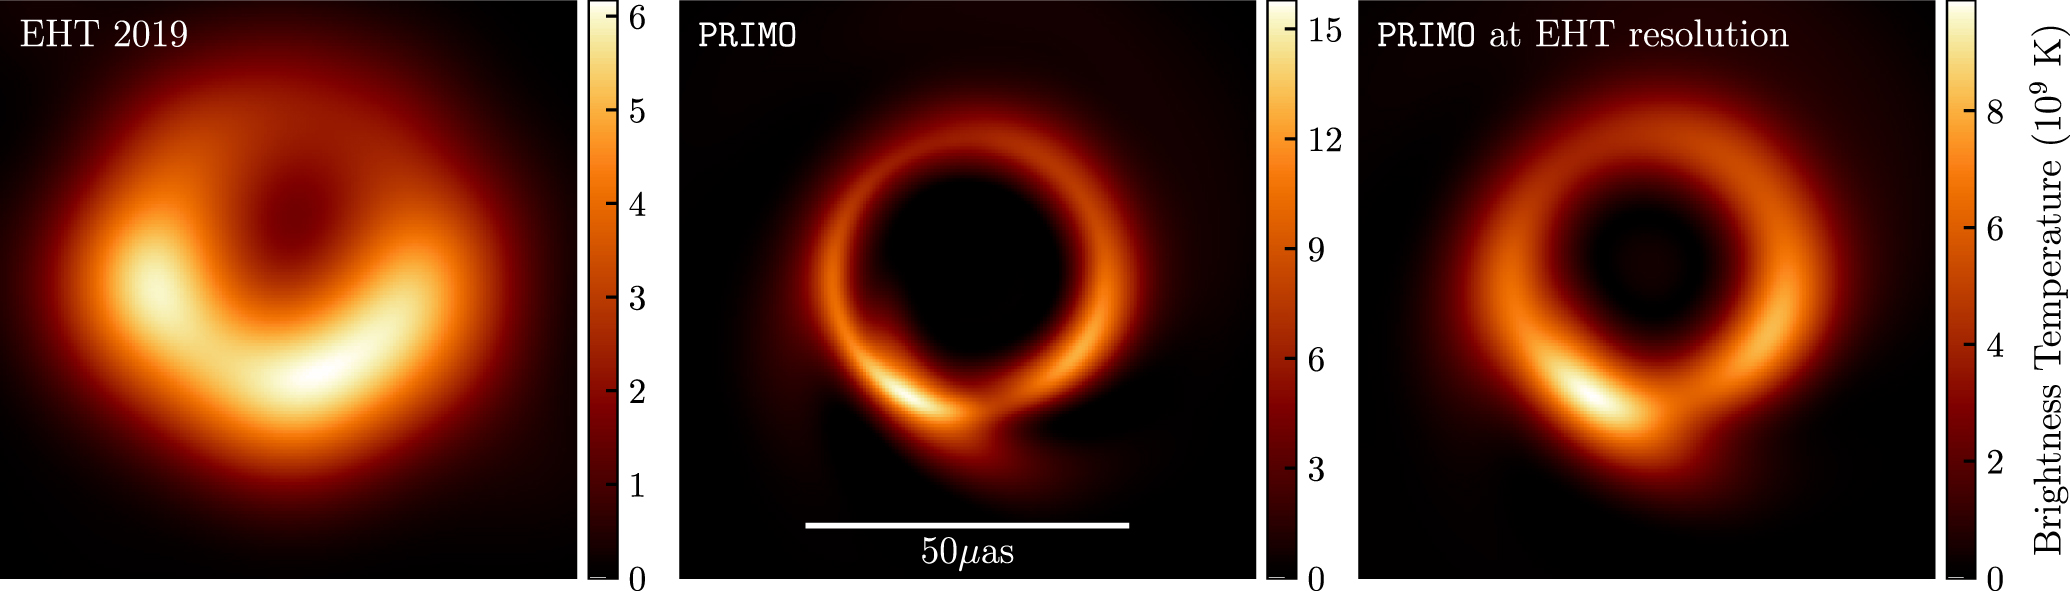 (Left) EHT image of the black hole in the center of M87 based on 2017 data, as reported in Event Horizon Telescope Collaboration et al. (2019a). (Middle) Result of reconstructing the image by applying PRIMO to the same data set. (Right) The PRIMO image blurred to the resolution of the EHT array. The diameter of the ring of emission, the north–south brightness asymmetry, and the central brightness depression are present in all images. The PRIMO image offers a superior utilization of the resolution and dynamical range of the EHT array.